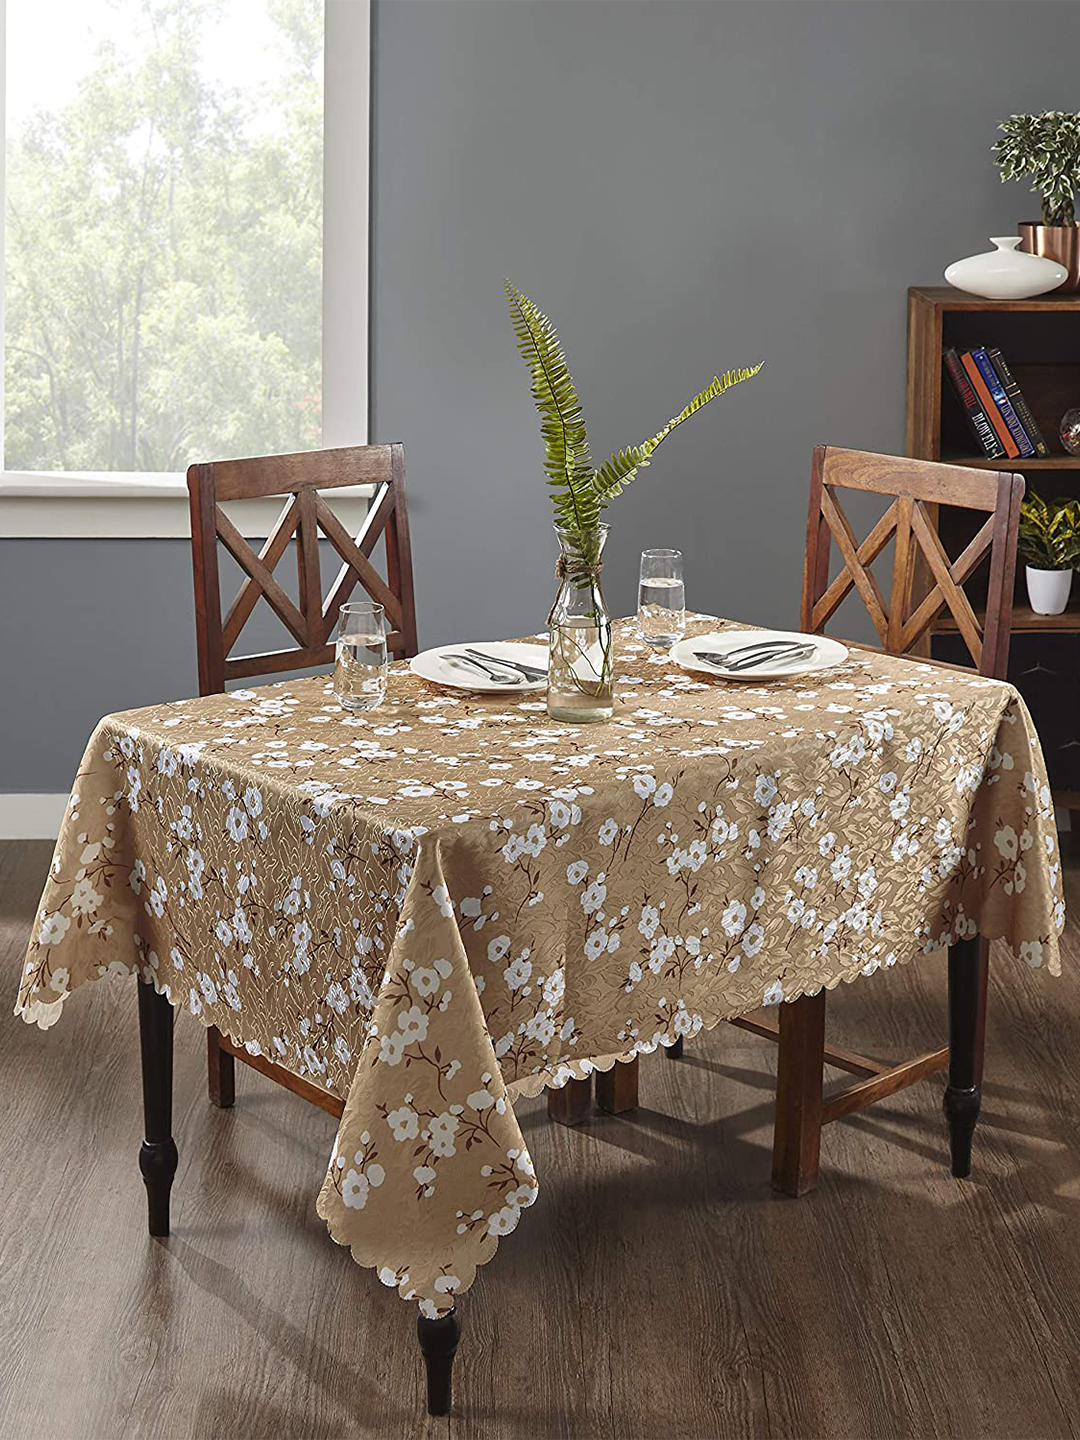 homewards Light Brown Shade Premium Digitally Printed Floral Design Polyester 6 Seater Rectangle Table Cover